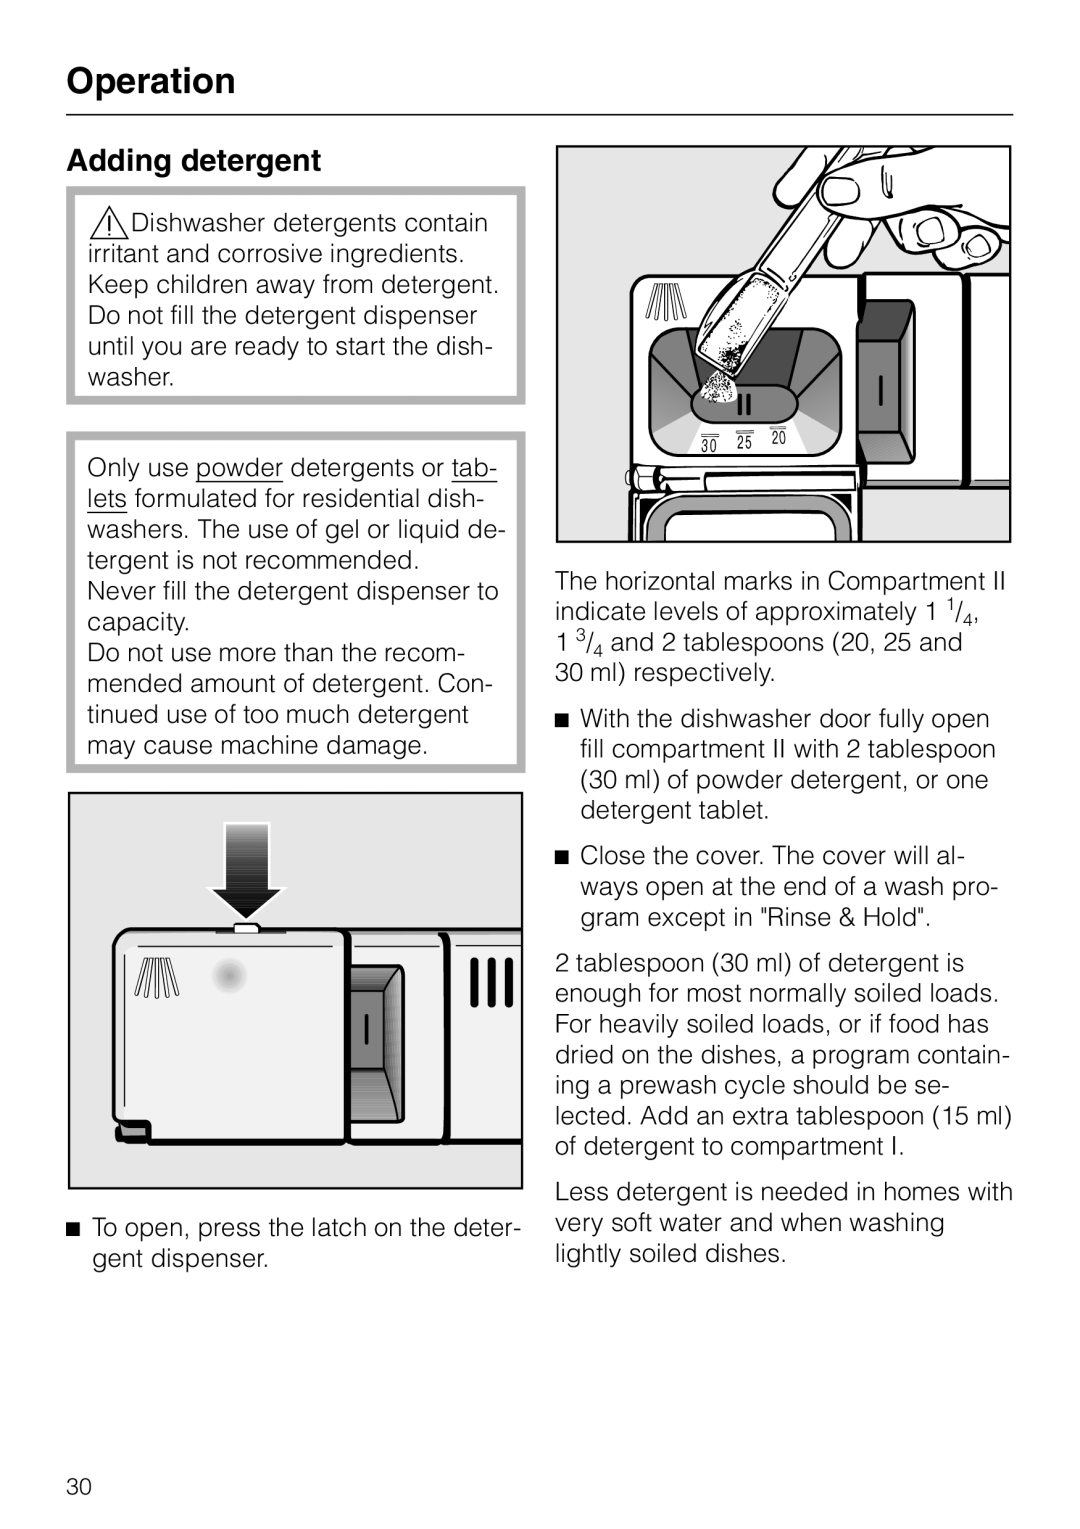 Miele G 851 operating instructions Operation, Adding detergent 